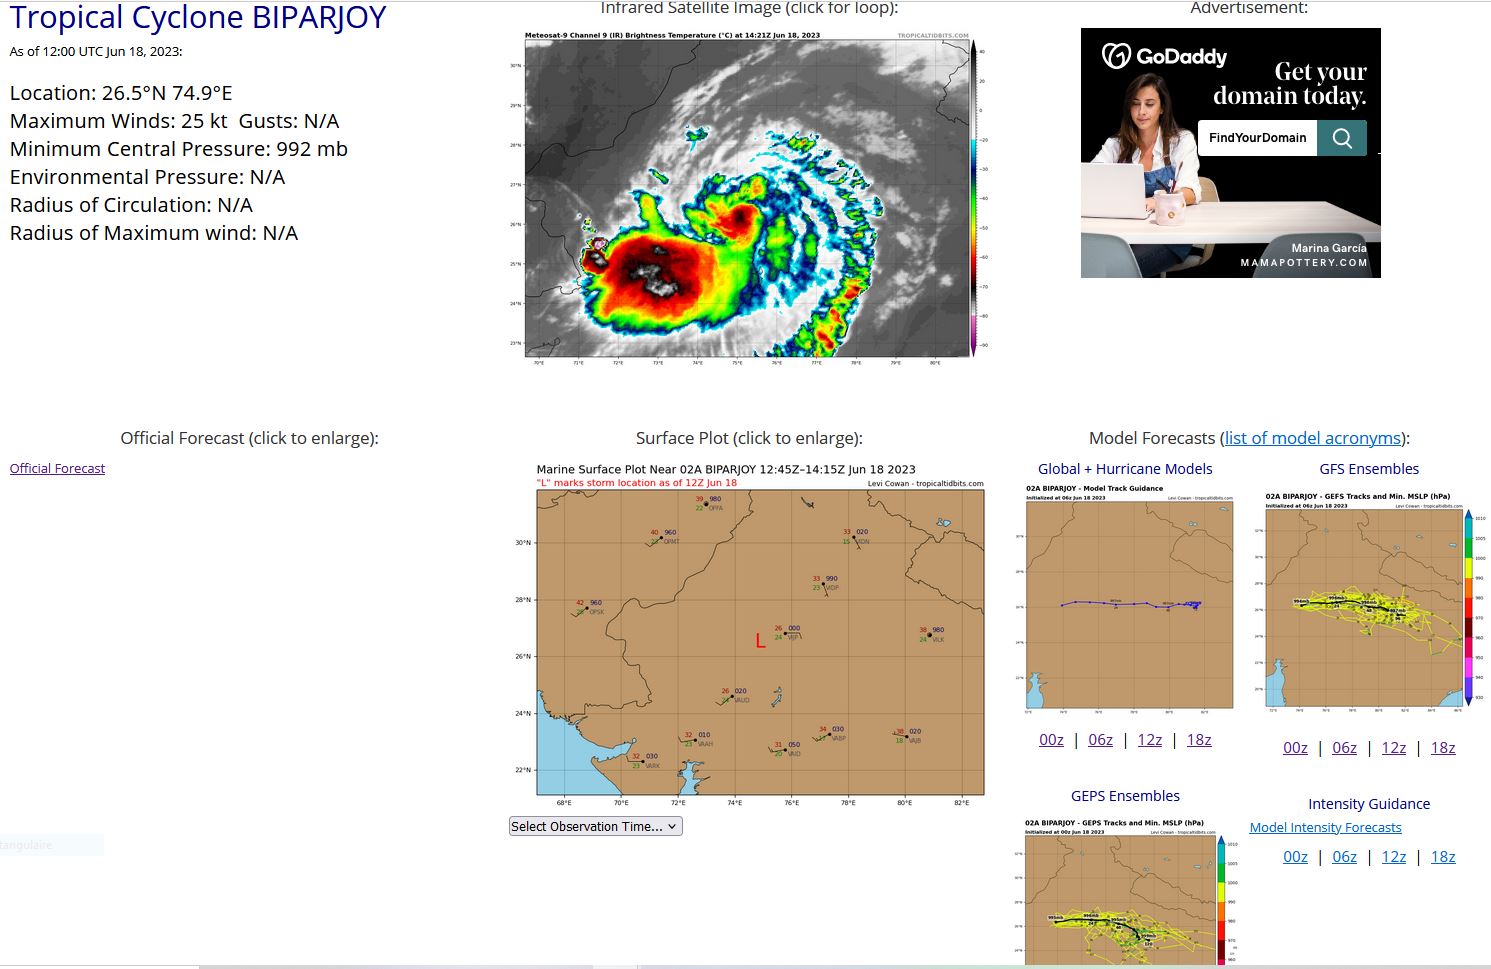 Tropical Cyclone Formation Alert issued for Invest 92L //Invest 90E//Over-land remnants of TC 02A(BIPARJOY)//1815utc